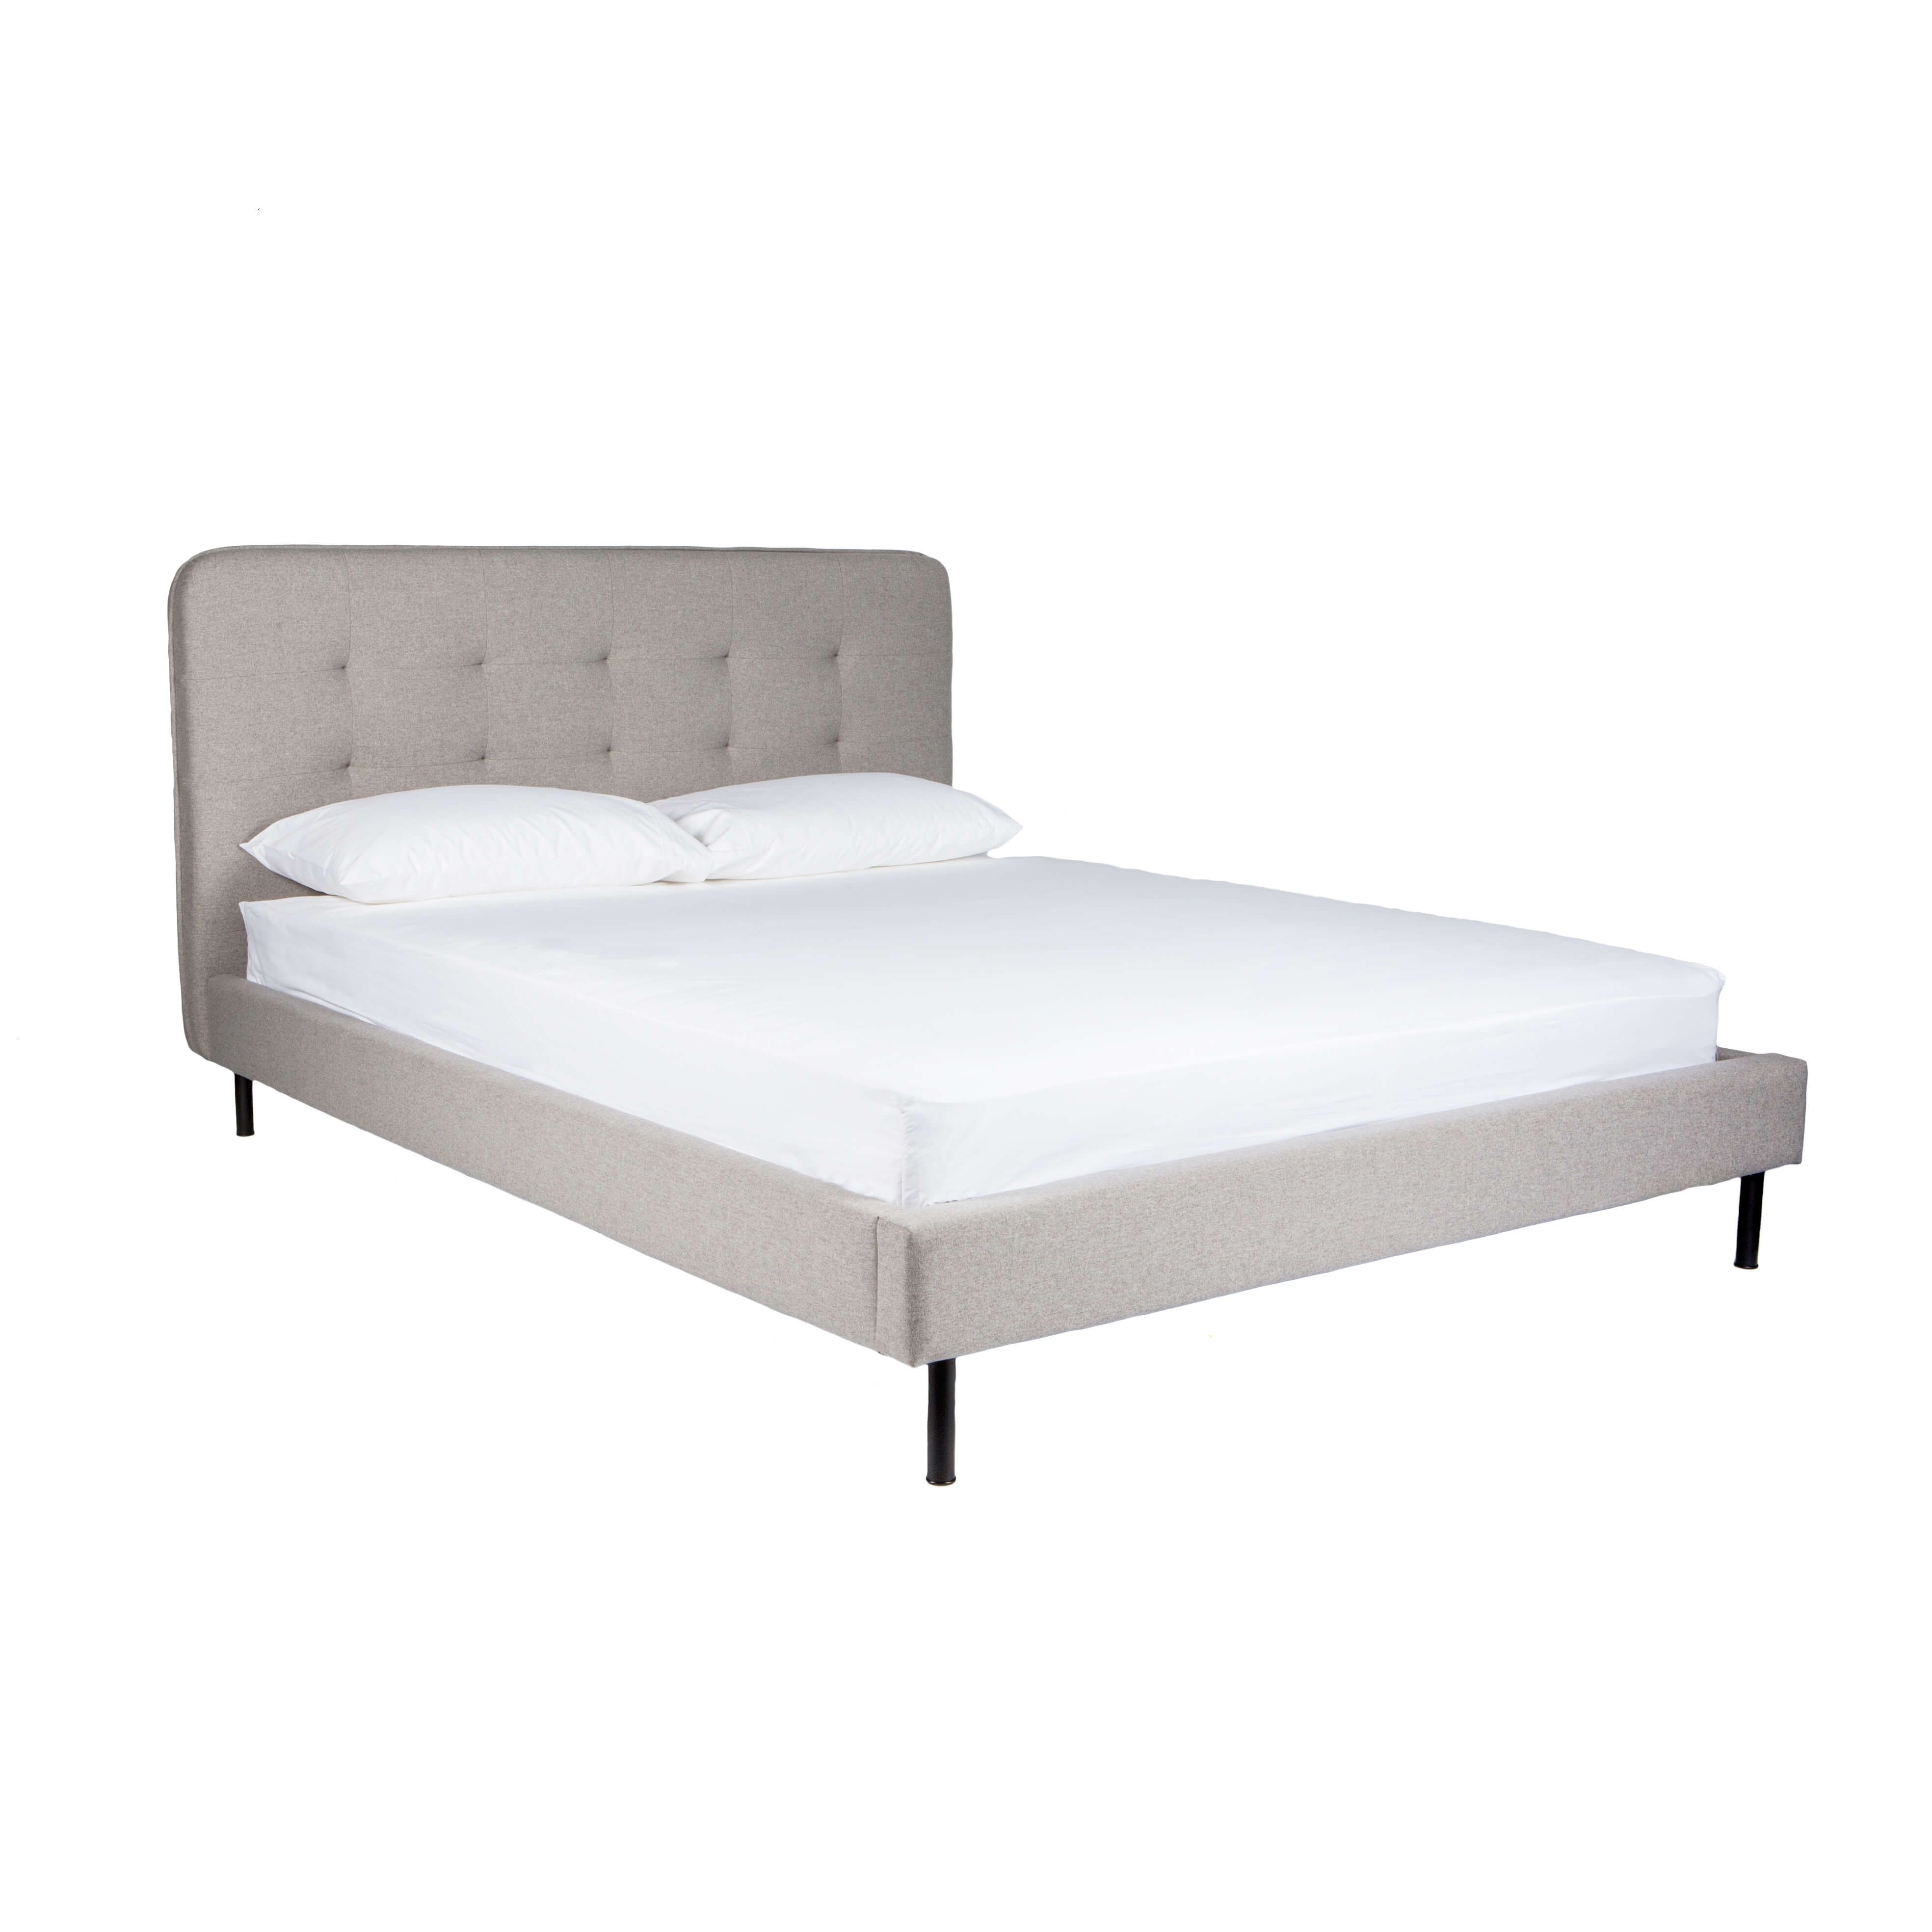 Queen Size Bed With Tufted Bedhead – Jaxon – Grey Inside Most Popular Jaxon Grey Sideboards (View 19 of 20)